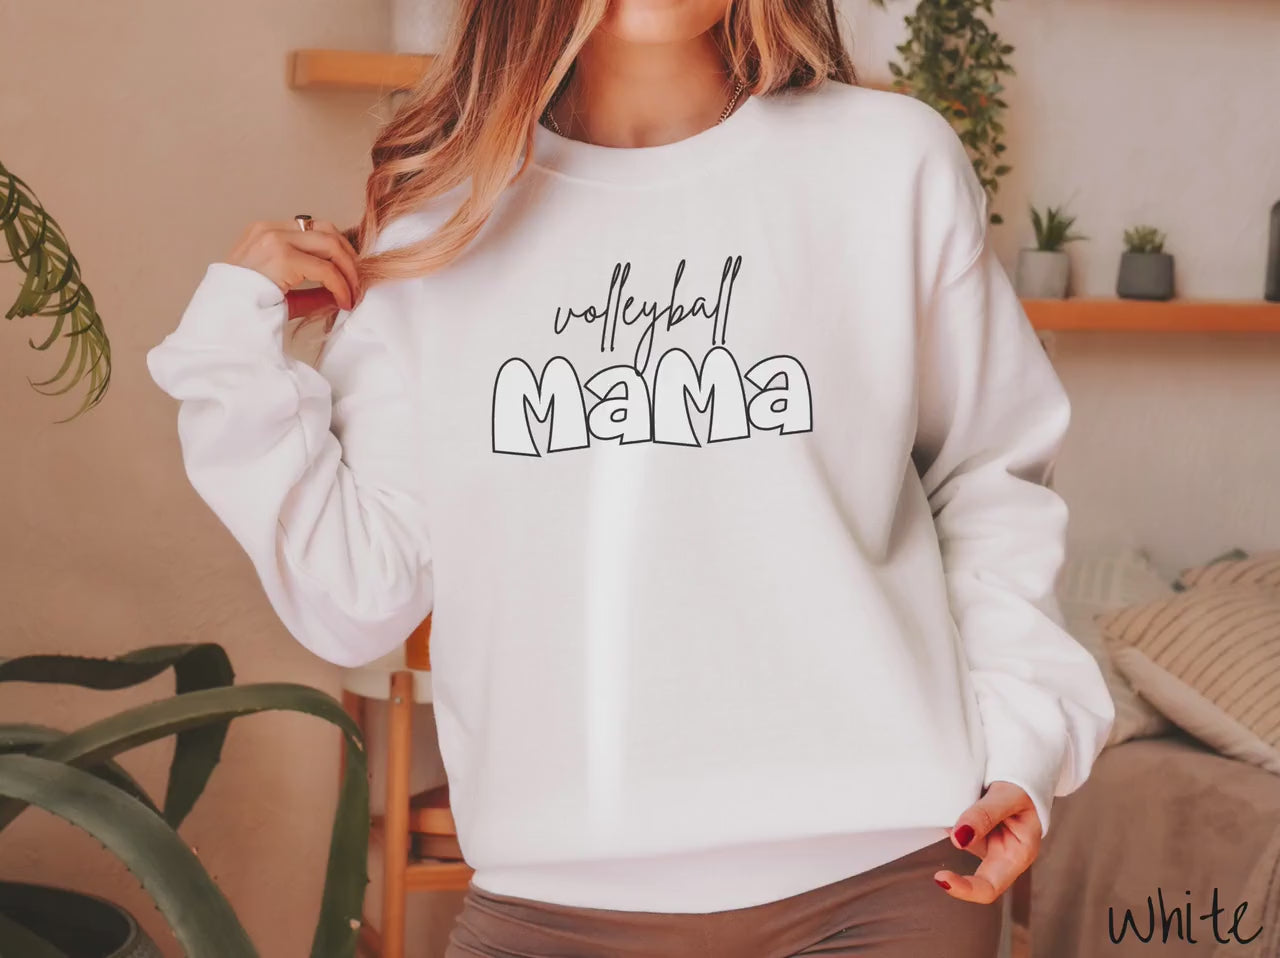 The Volleyball Mama Varsity Sweatshirt, Gift this Sports Mom Sweater to your Family!